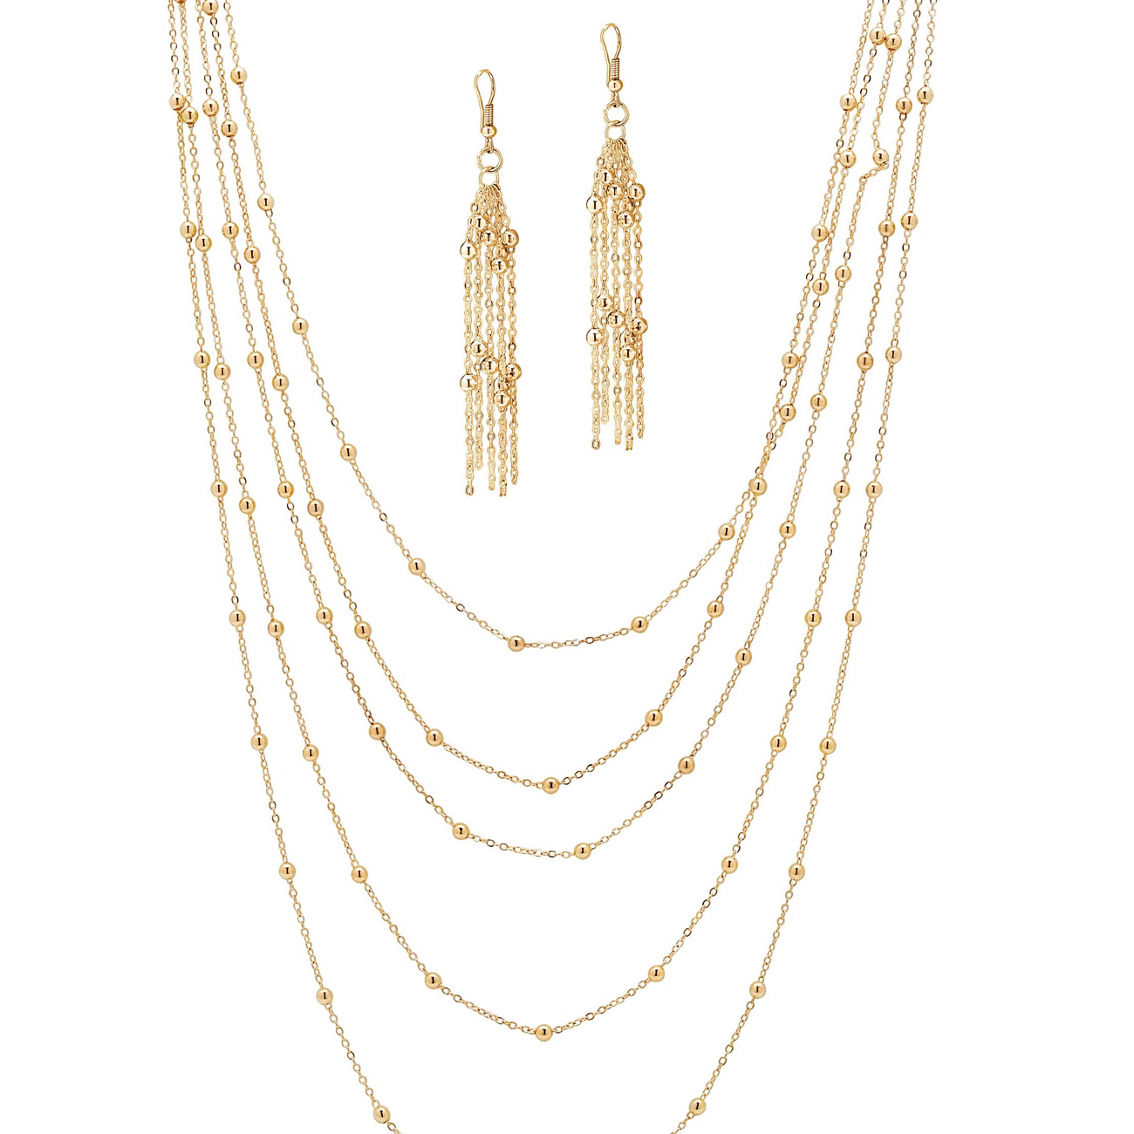 PalmBeach 2 Piece Multi-Chain Station Necklace and Drop Earrings Set Goldtone - Image 1 of 5